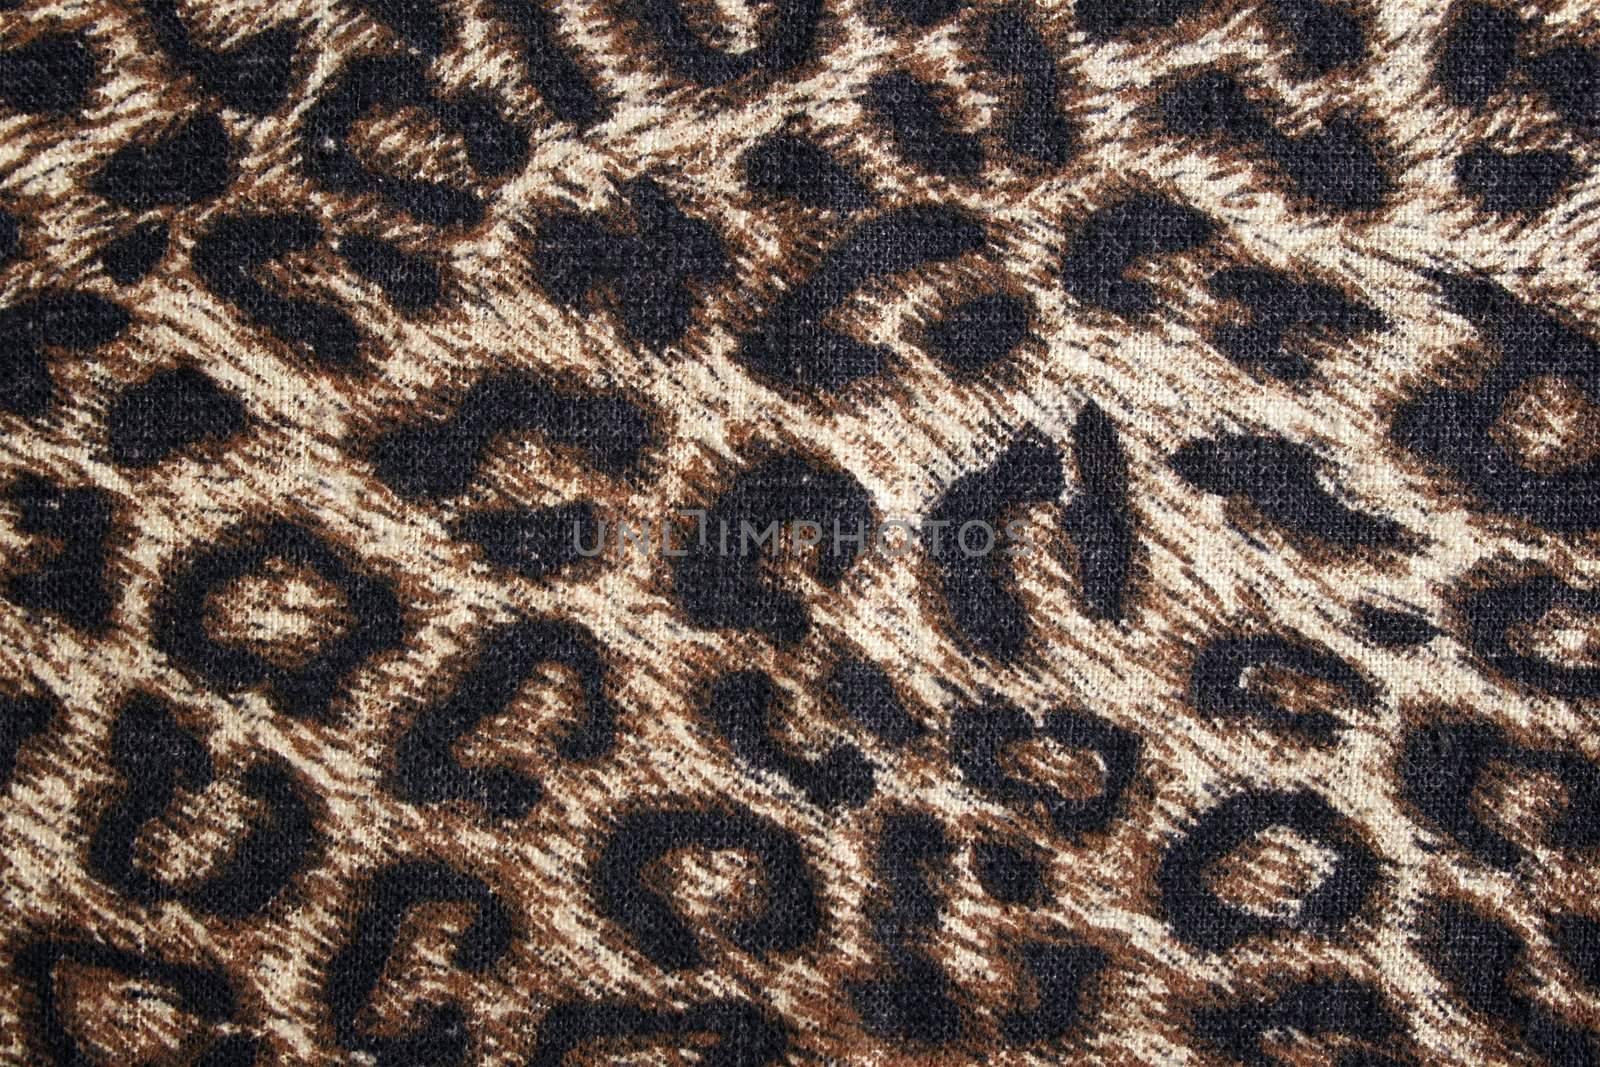 Leopard spotted fabric background by anikasalsera